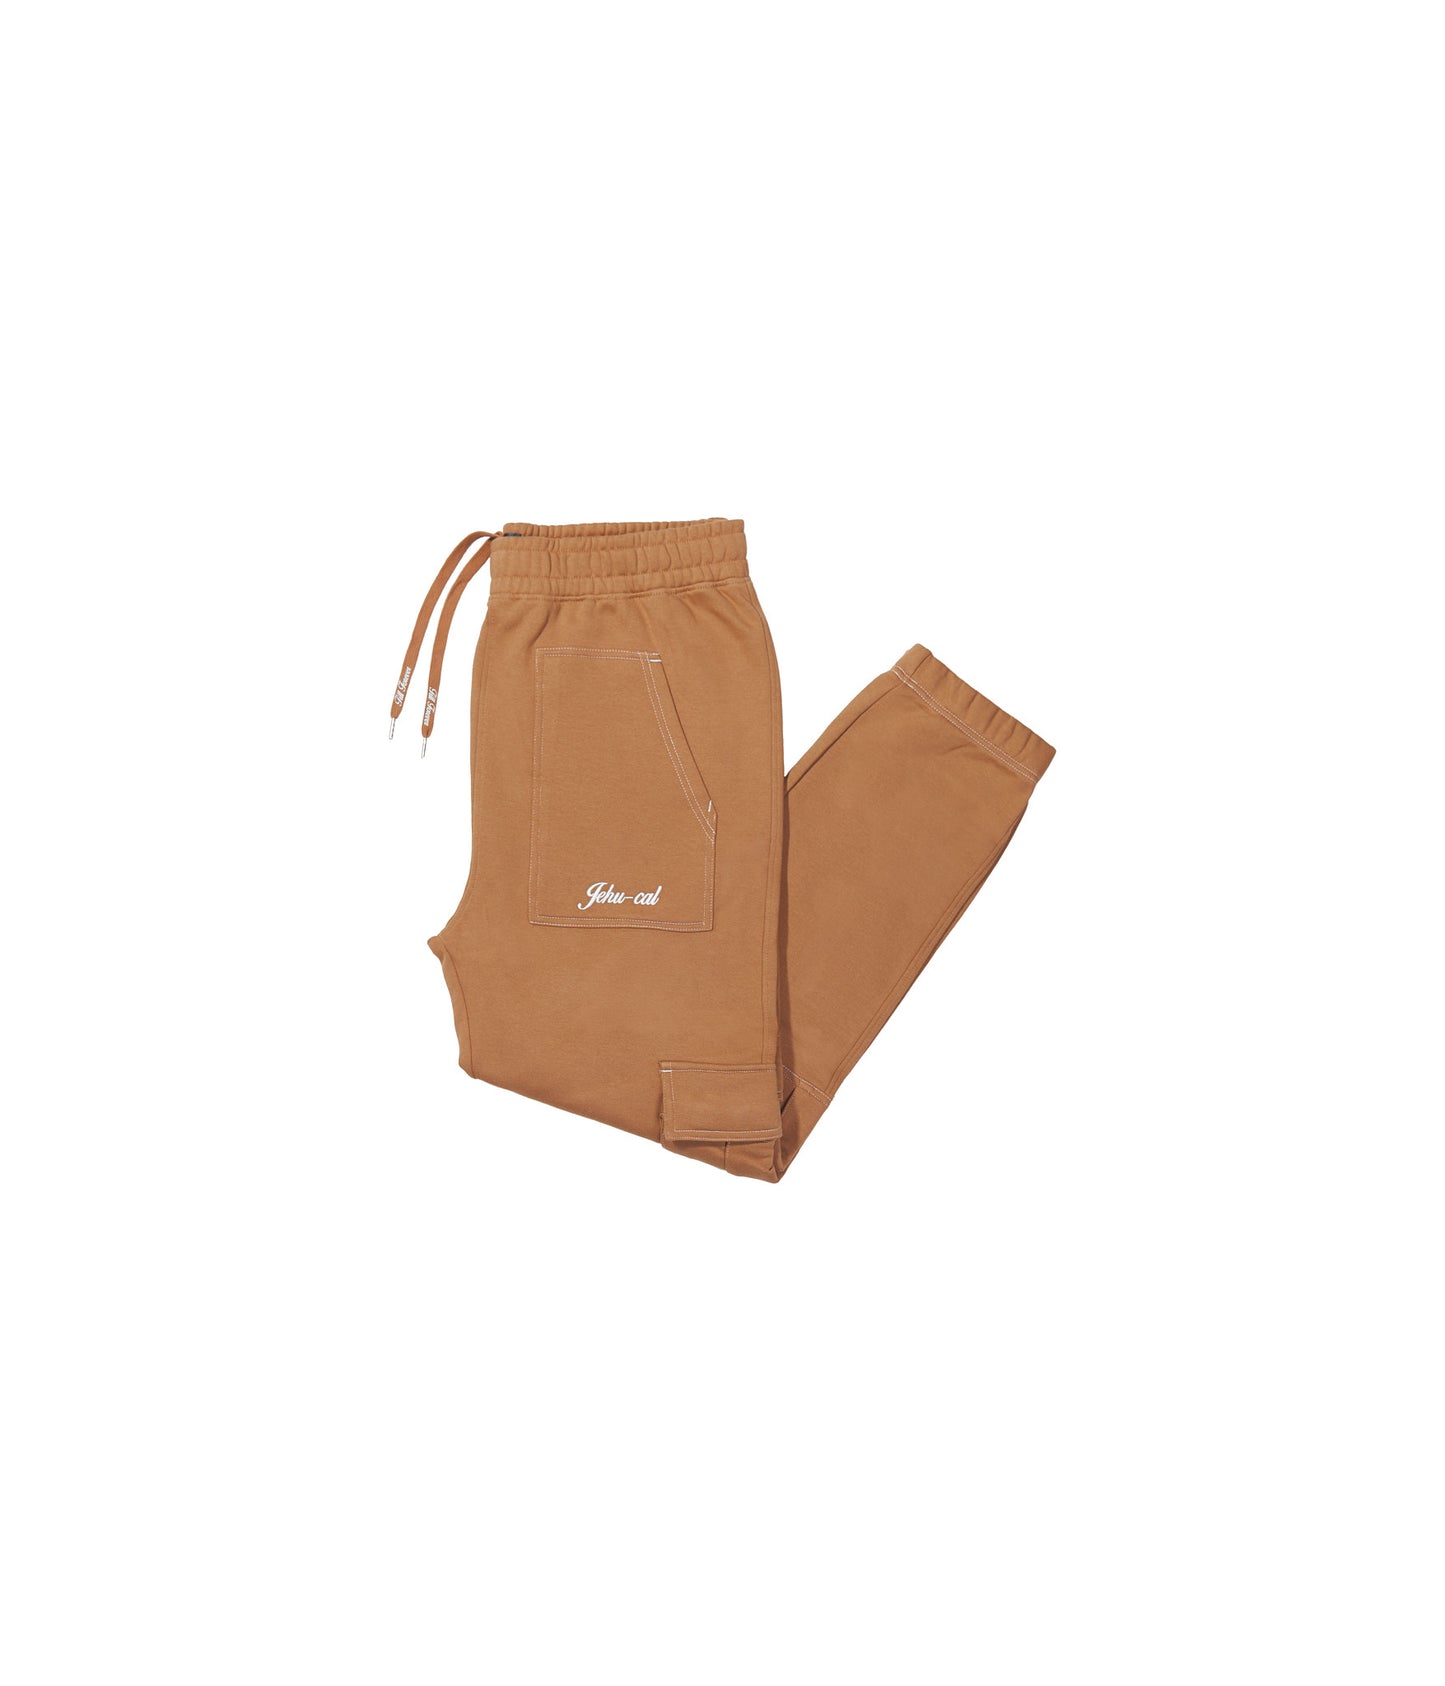 *SALE* TILL FOREVER TRACKPANTS (BISCOFF BROWN)